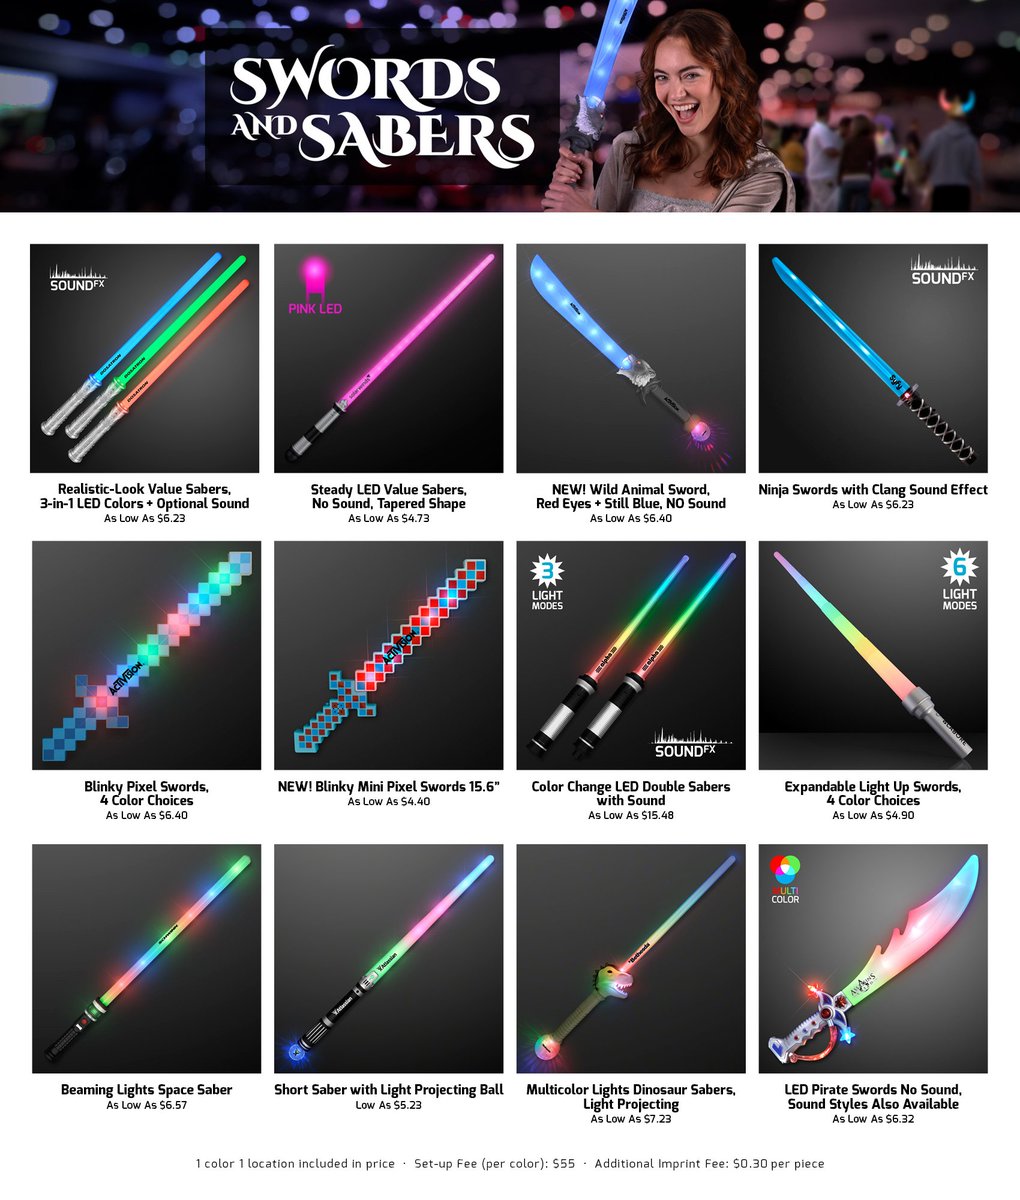 May the force be with you 🤺 this summer 🏖 Let the #festivities begin 📅 Be the one who brightens up #parties 🥳 #kidsevents 🤹‍♂️ #SportingEvents ⚾️ #tailgateparty 🛻 You're never too old to have fun! Add your #brandlogo 🪪 to these #lightup #swords 🪈 and #sabers ⚔️